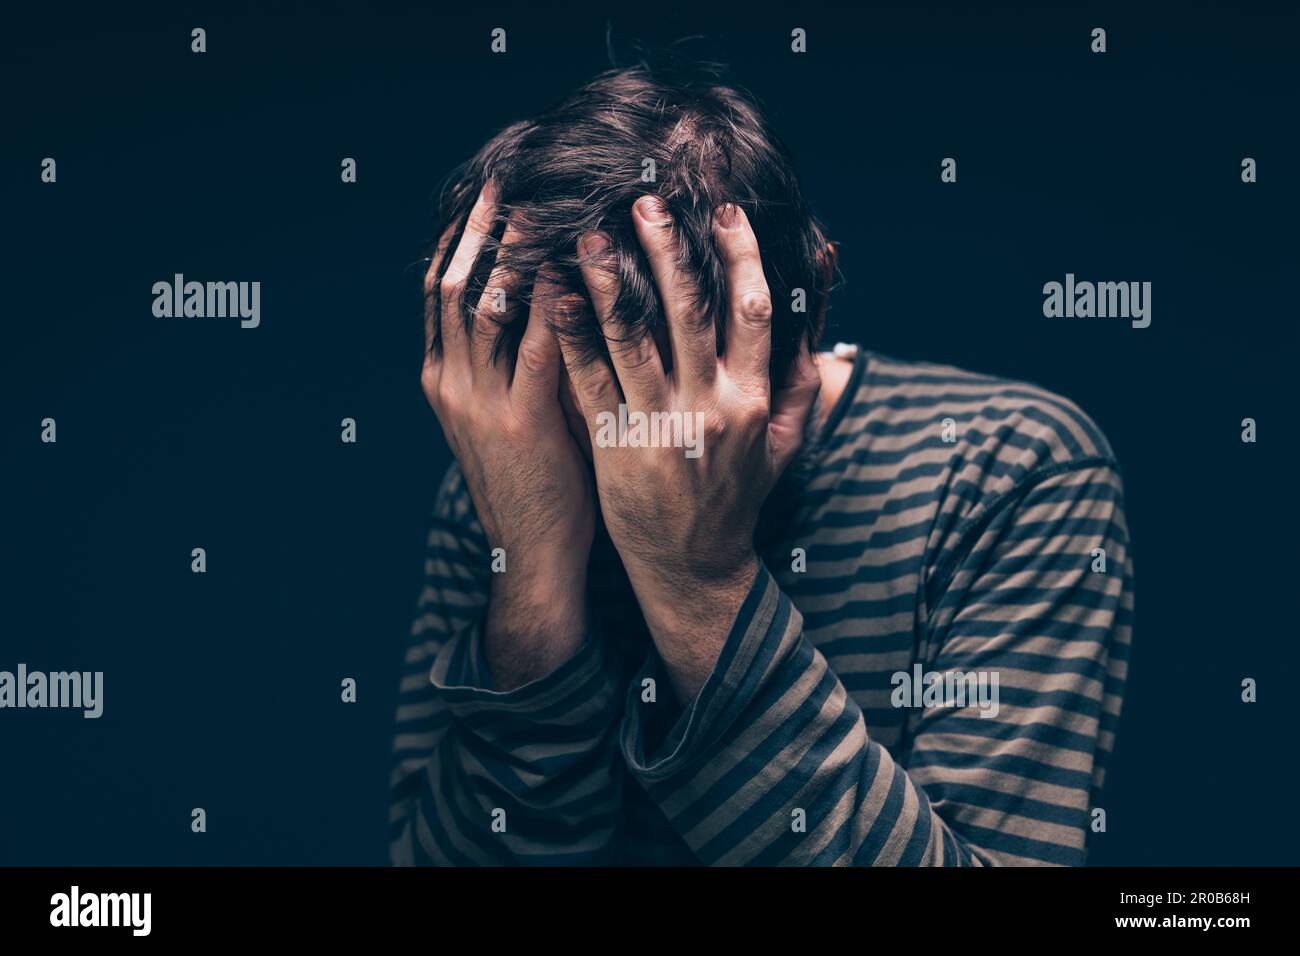 Despair and hopelessness, low key male portrait with selective focus Stock Photo